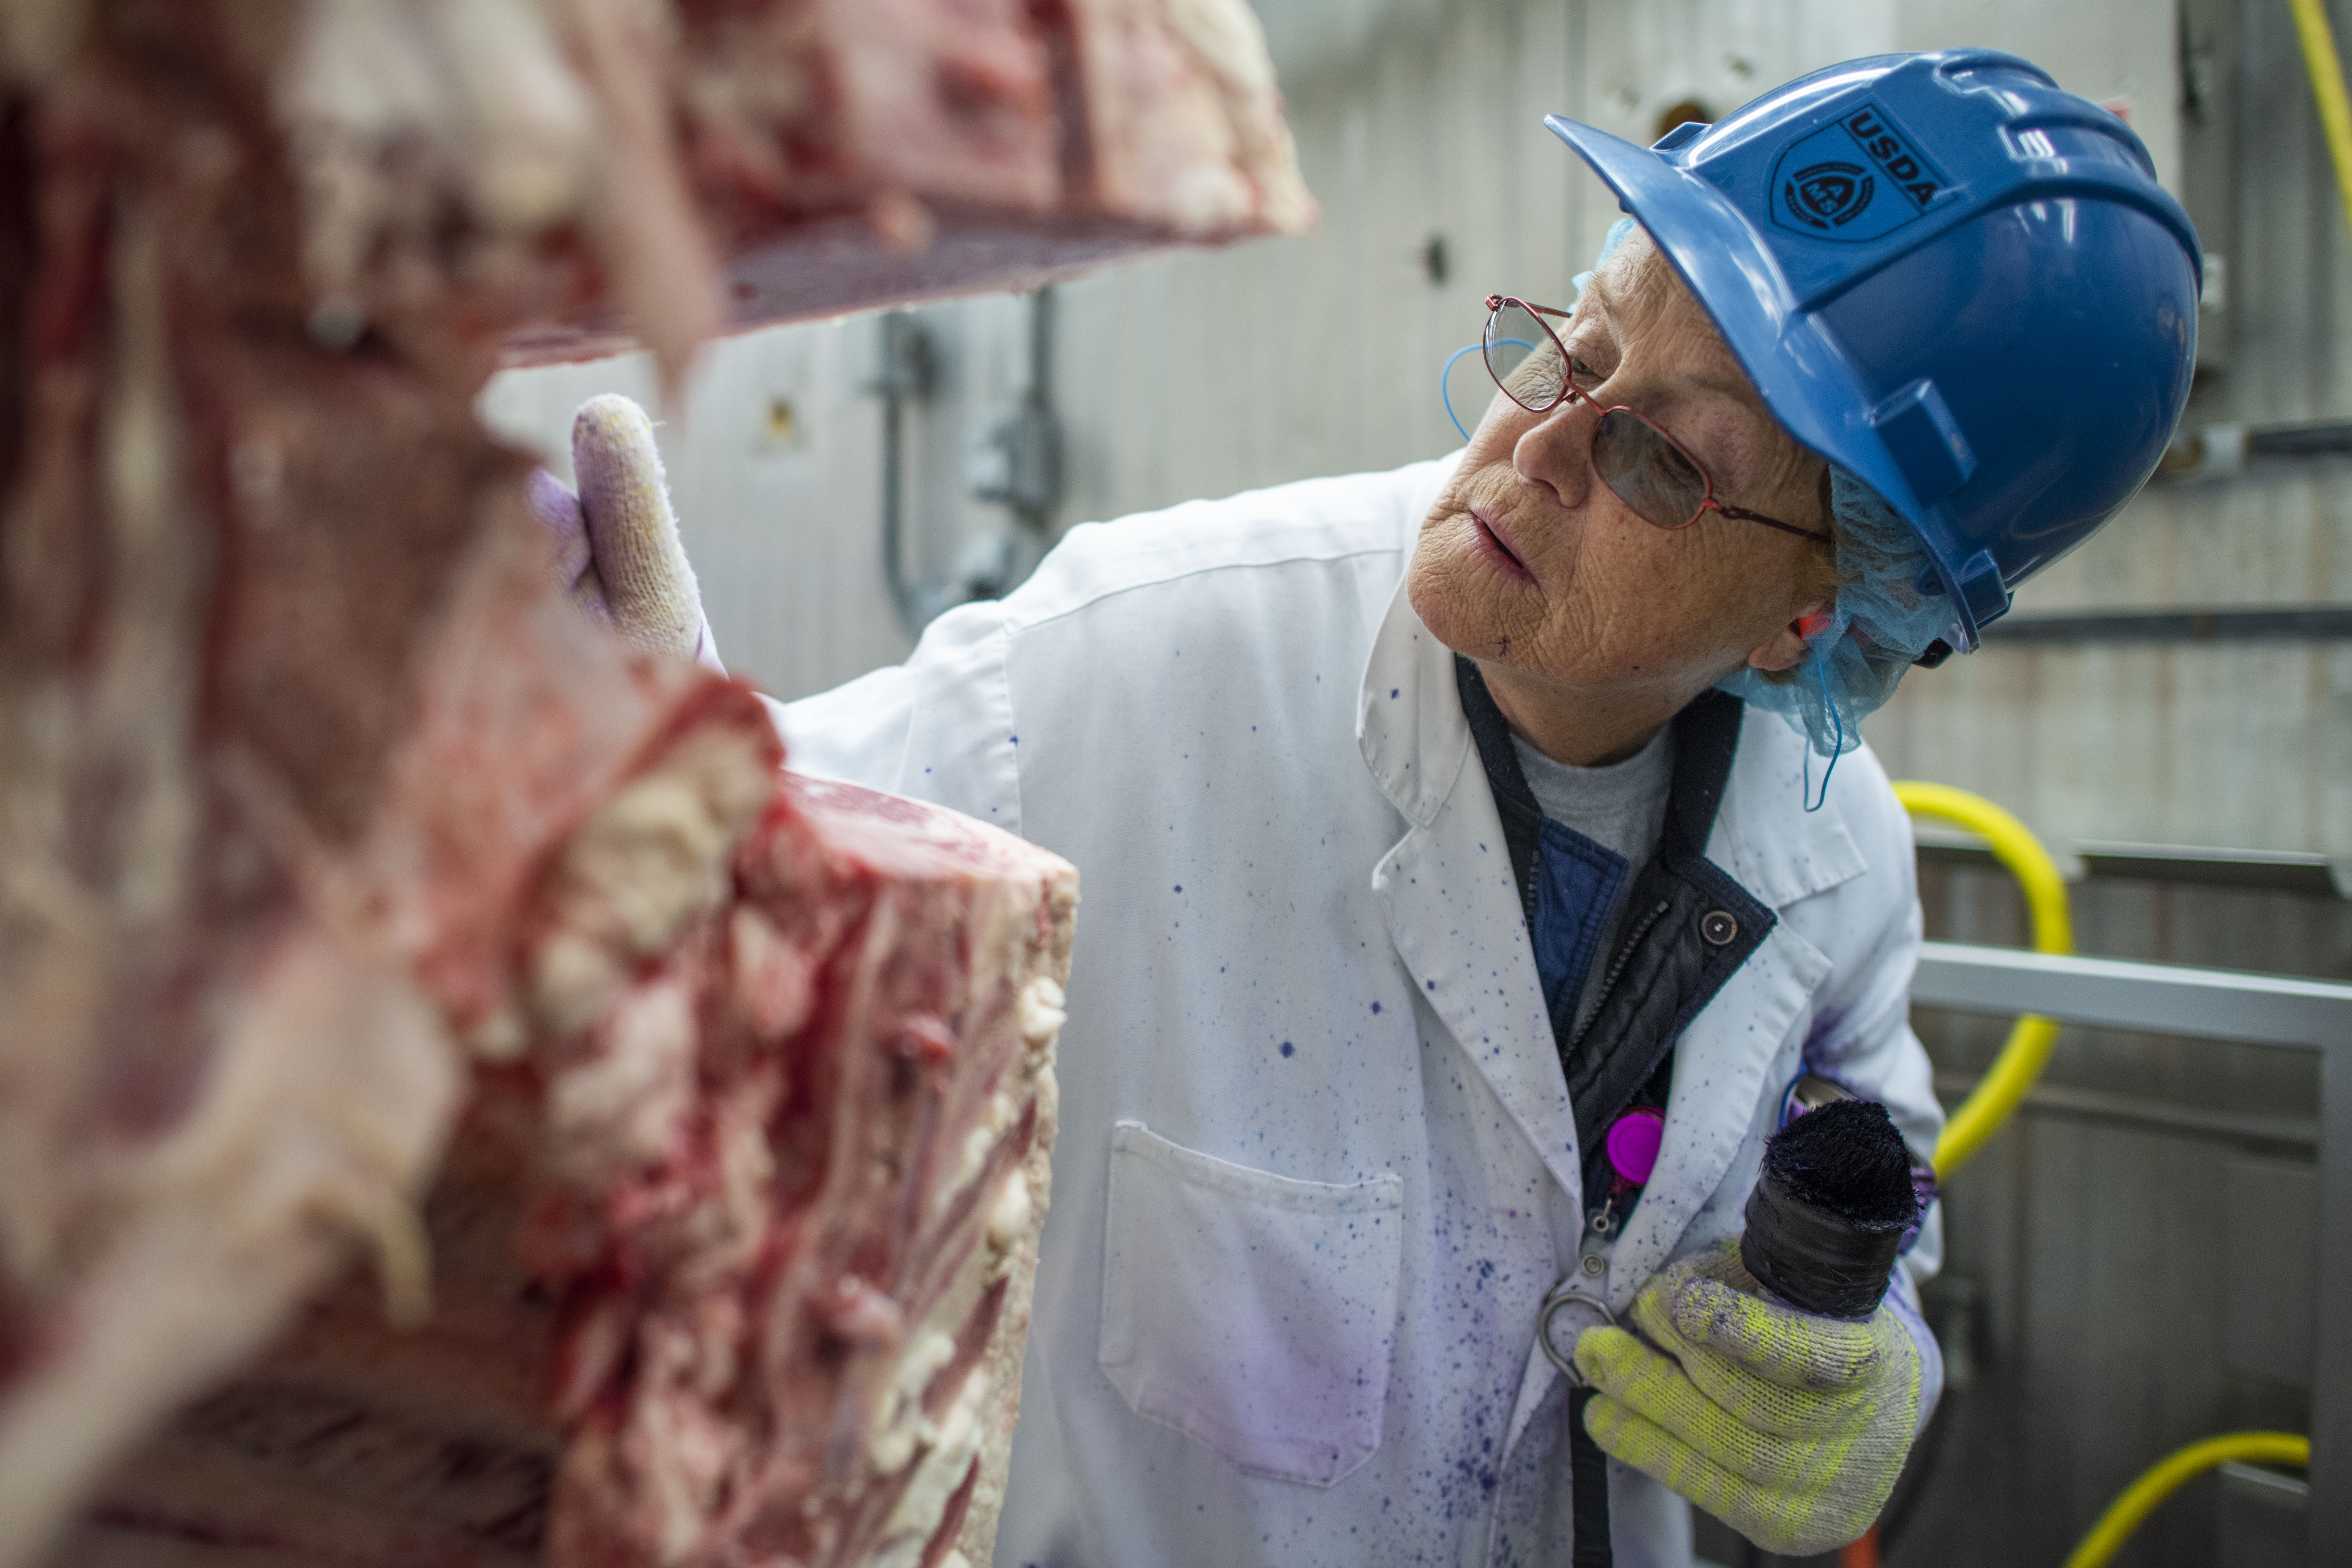 Woman in Blue hard hat and white coat closely examining a beef carcass in a plan